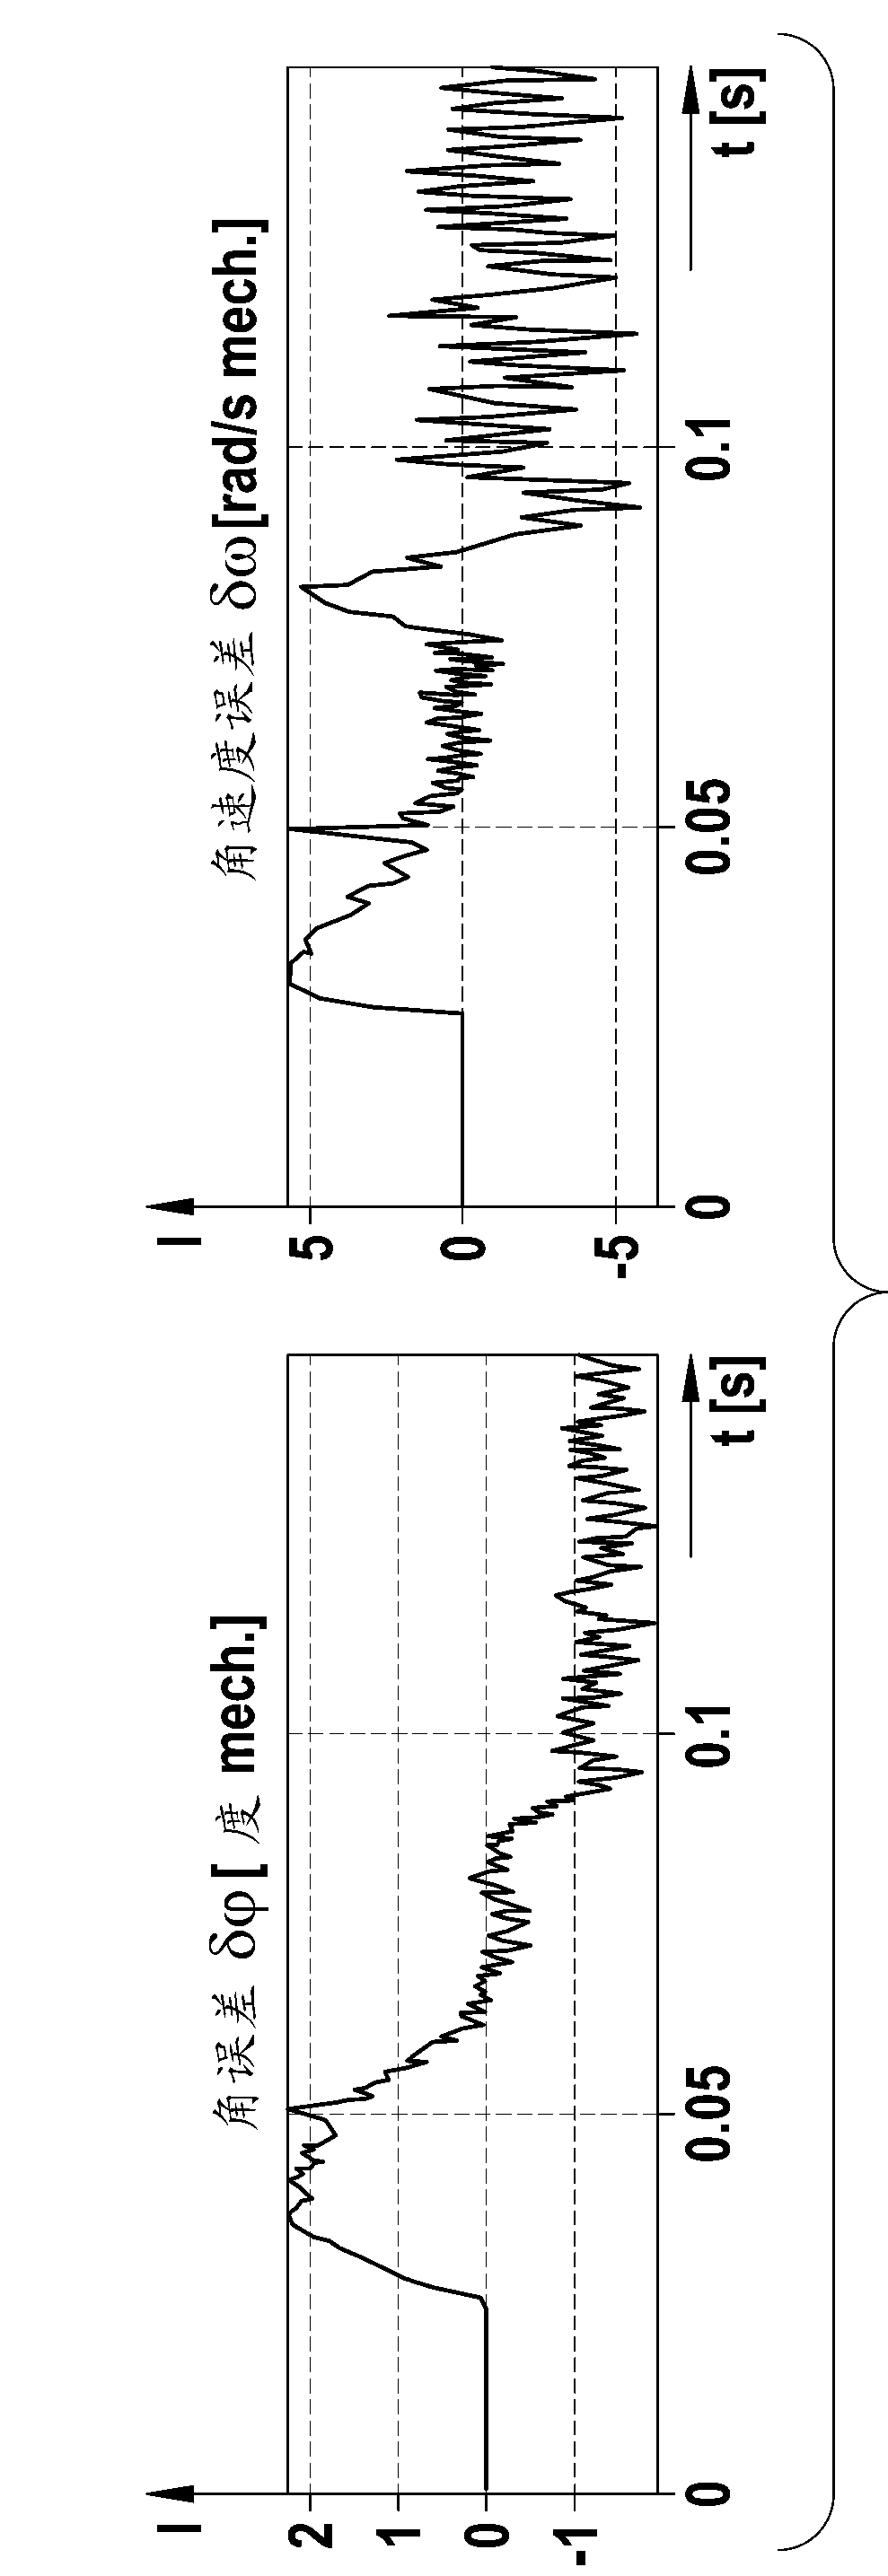 Method and device for the angle sensor-free position detection of the rotor shaft of a permanently excited synchronous machine based on current signals and voltage signals